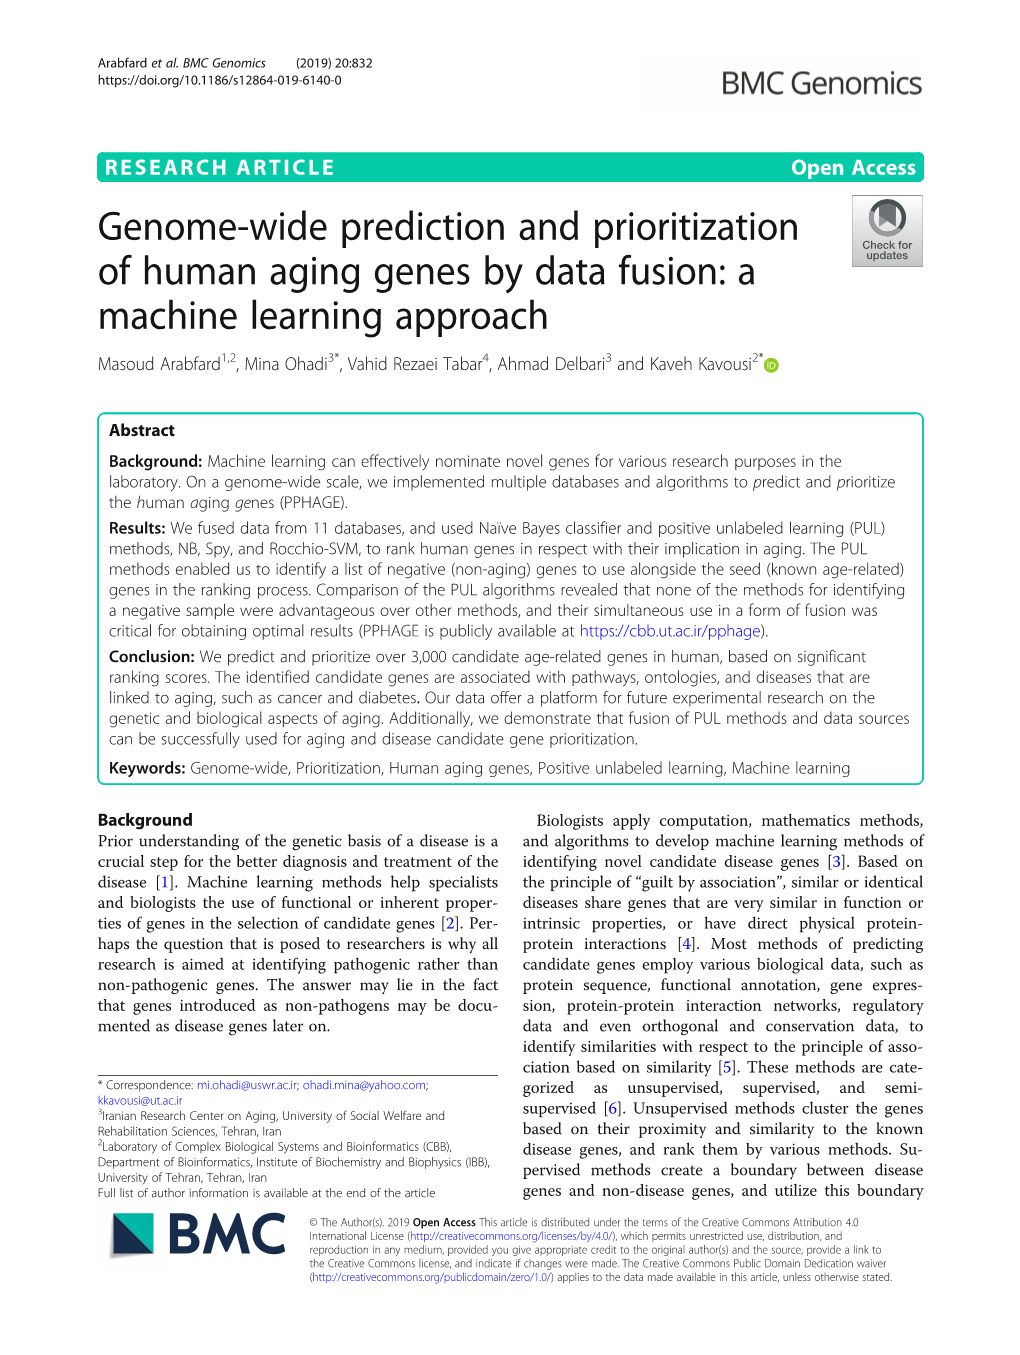 Genome-Wide Prediction and Prioritization of Human Aging Genes by Data Fusion: a Machine Learning Approach